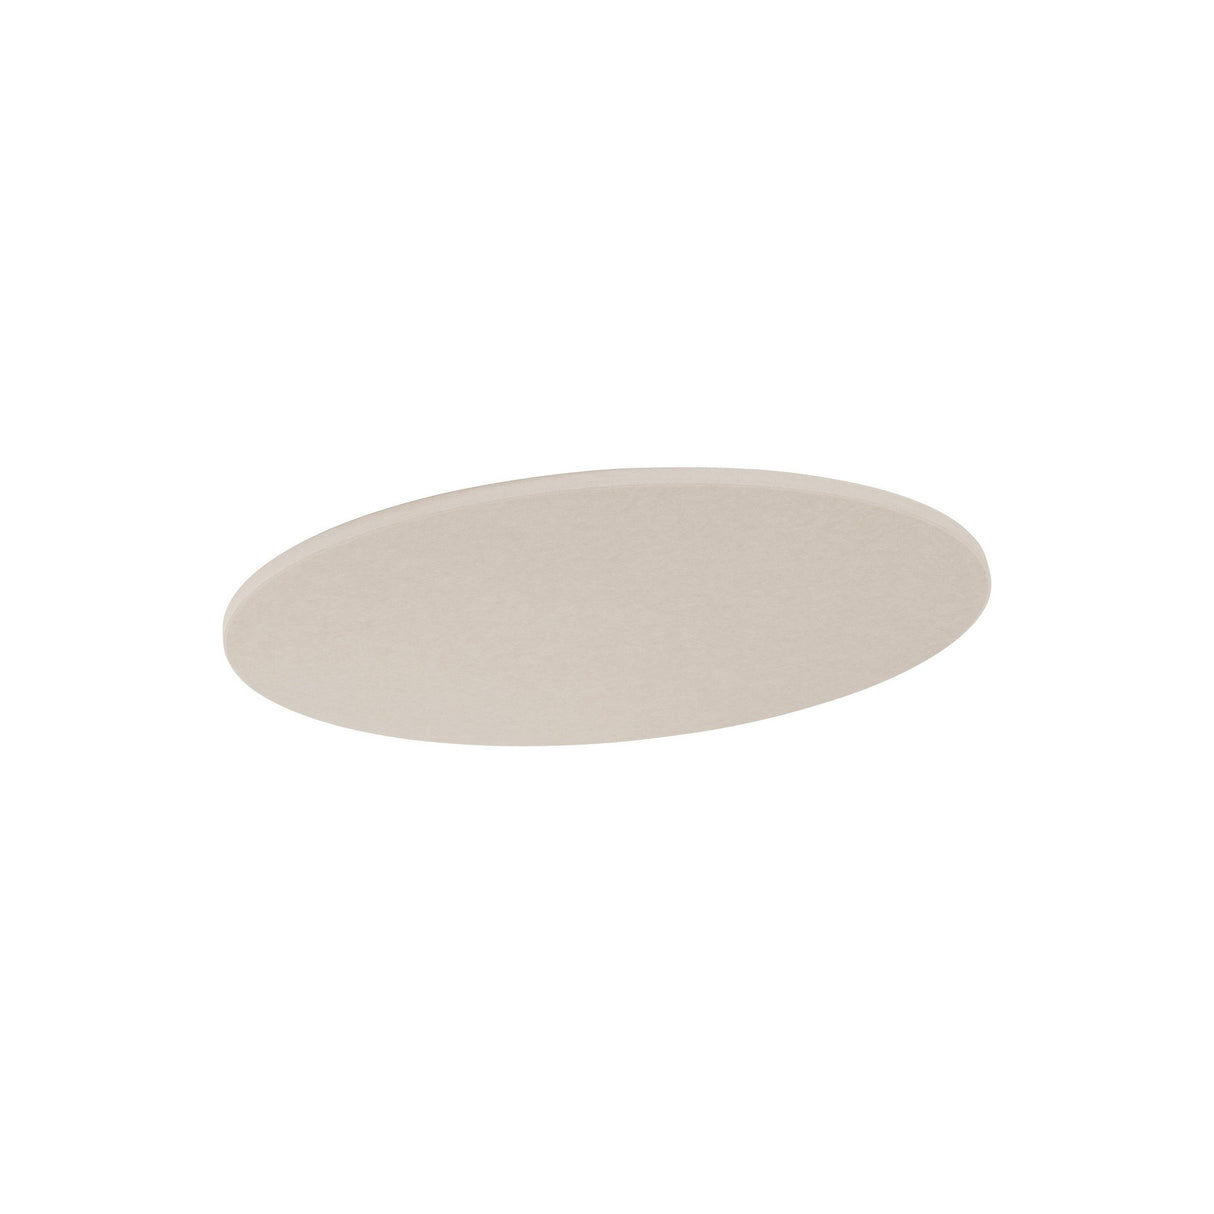 Primacoustic EcoScapes Round Cloud 33-Inch Micro-Beveled Edge Wall Panel, Ivory 2-Pack